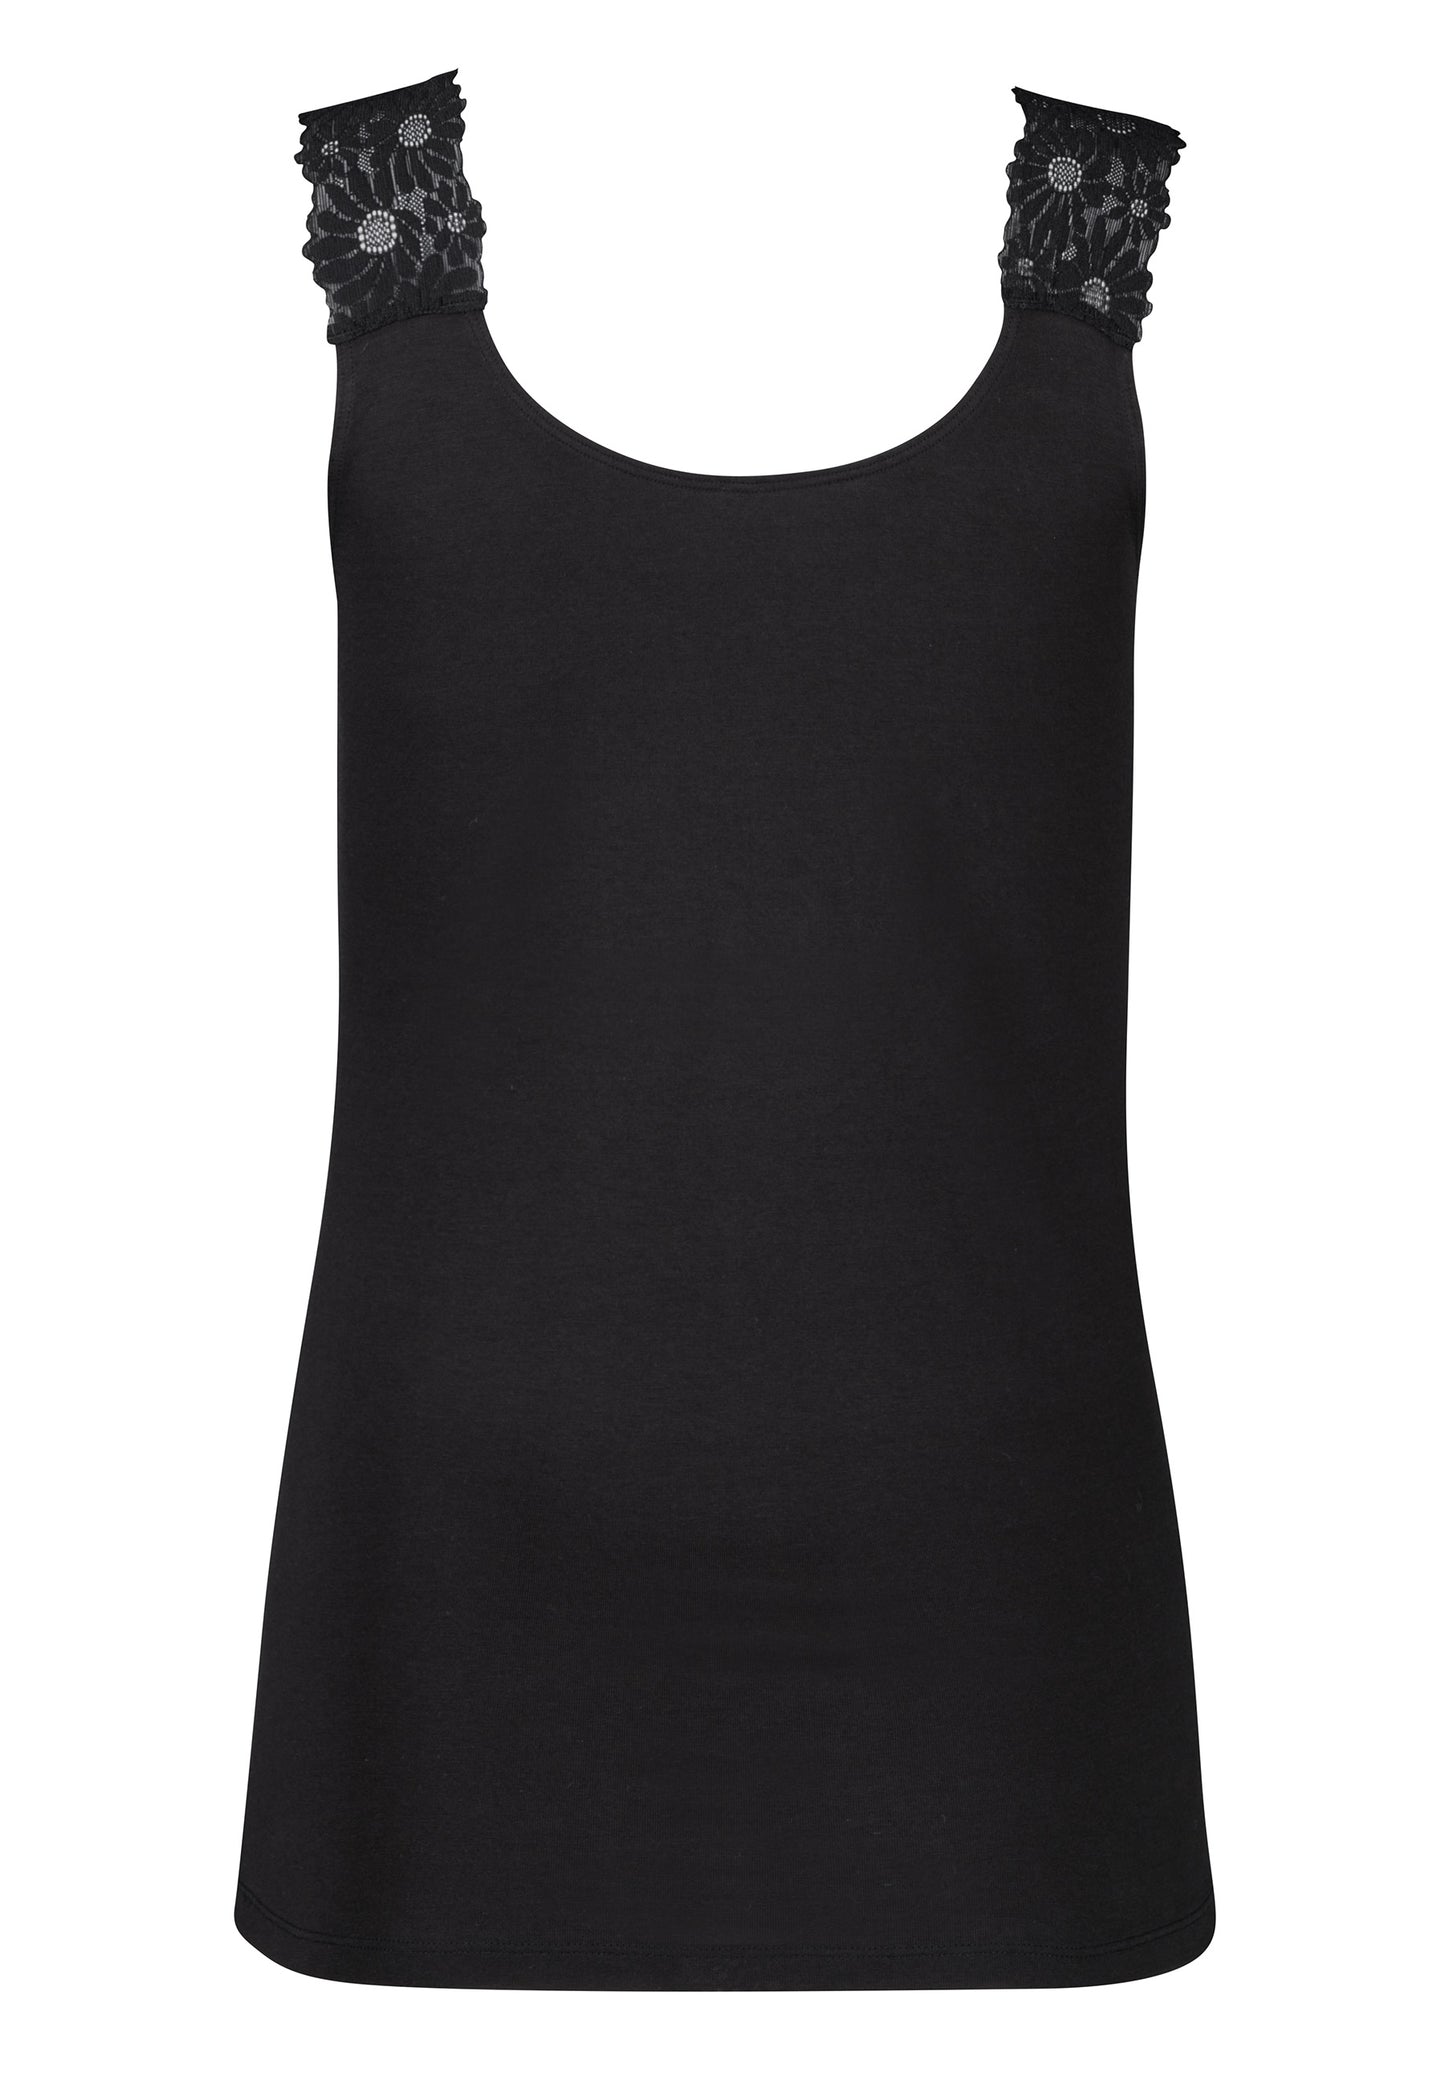 Skiny Every Day In CottonLace Multipack Damen Tank Top (Black)